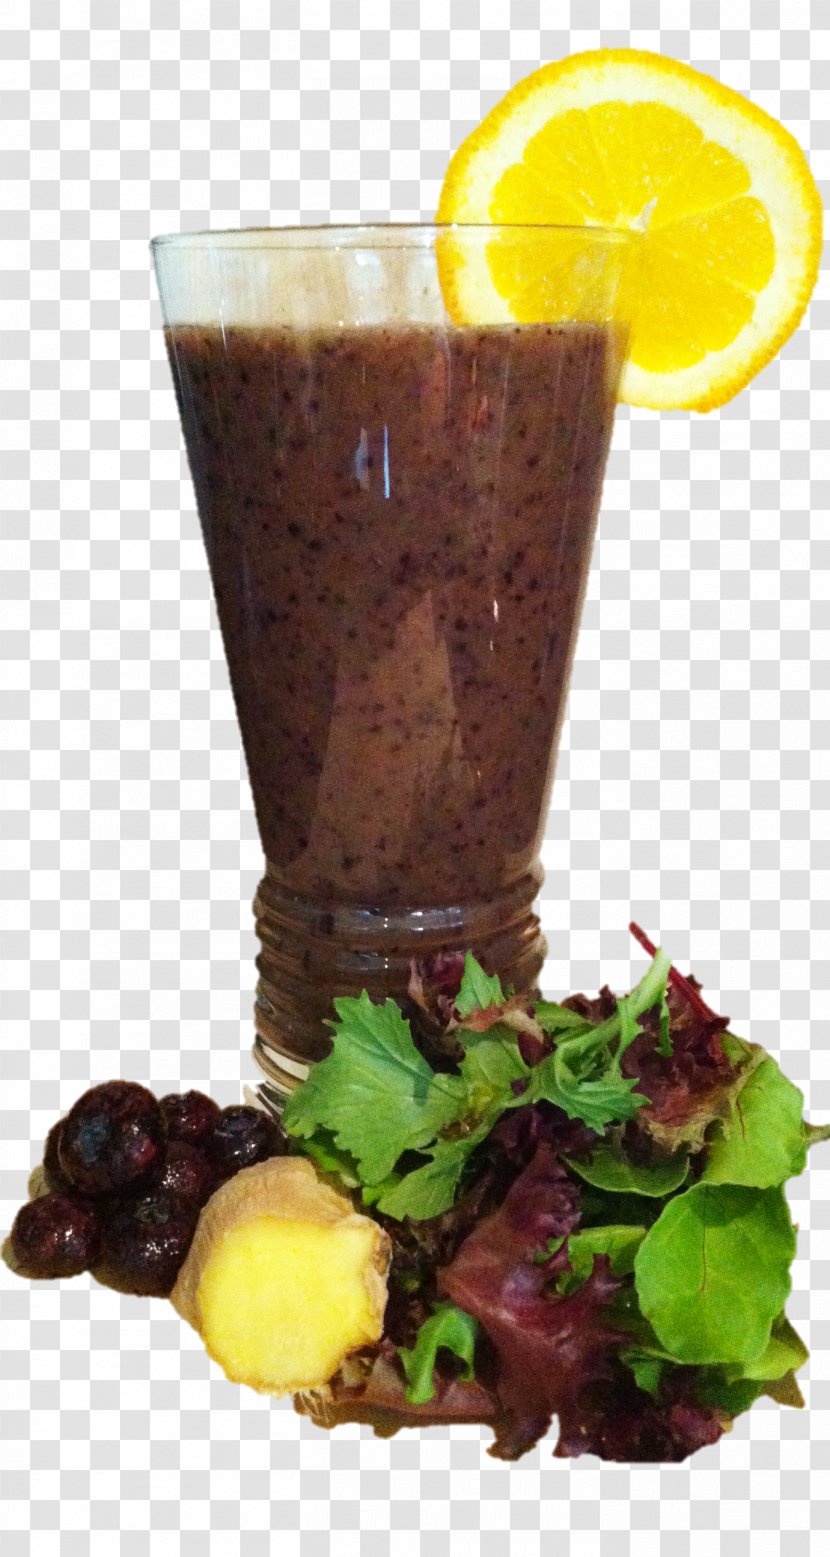 Health Shake Smoothie Juice Non-alcoholic Drink Transparent PNG